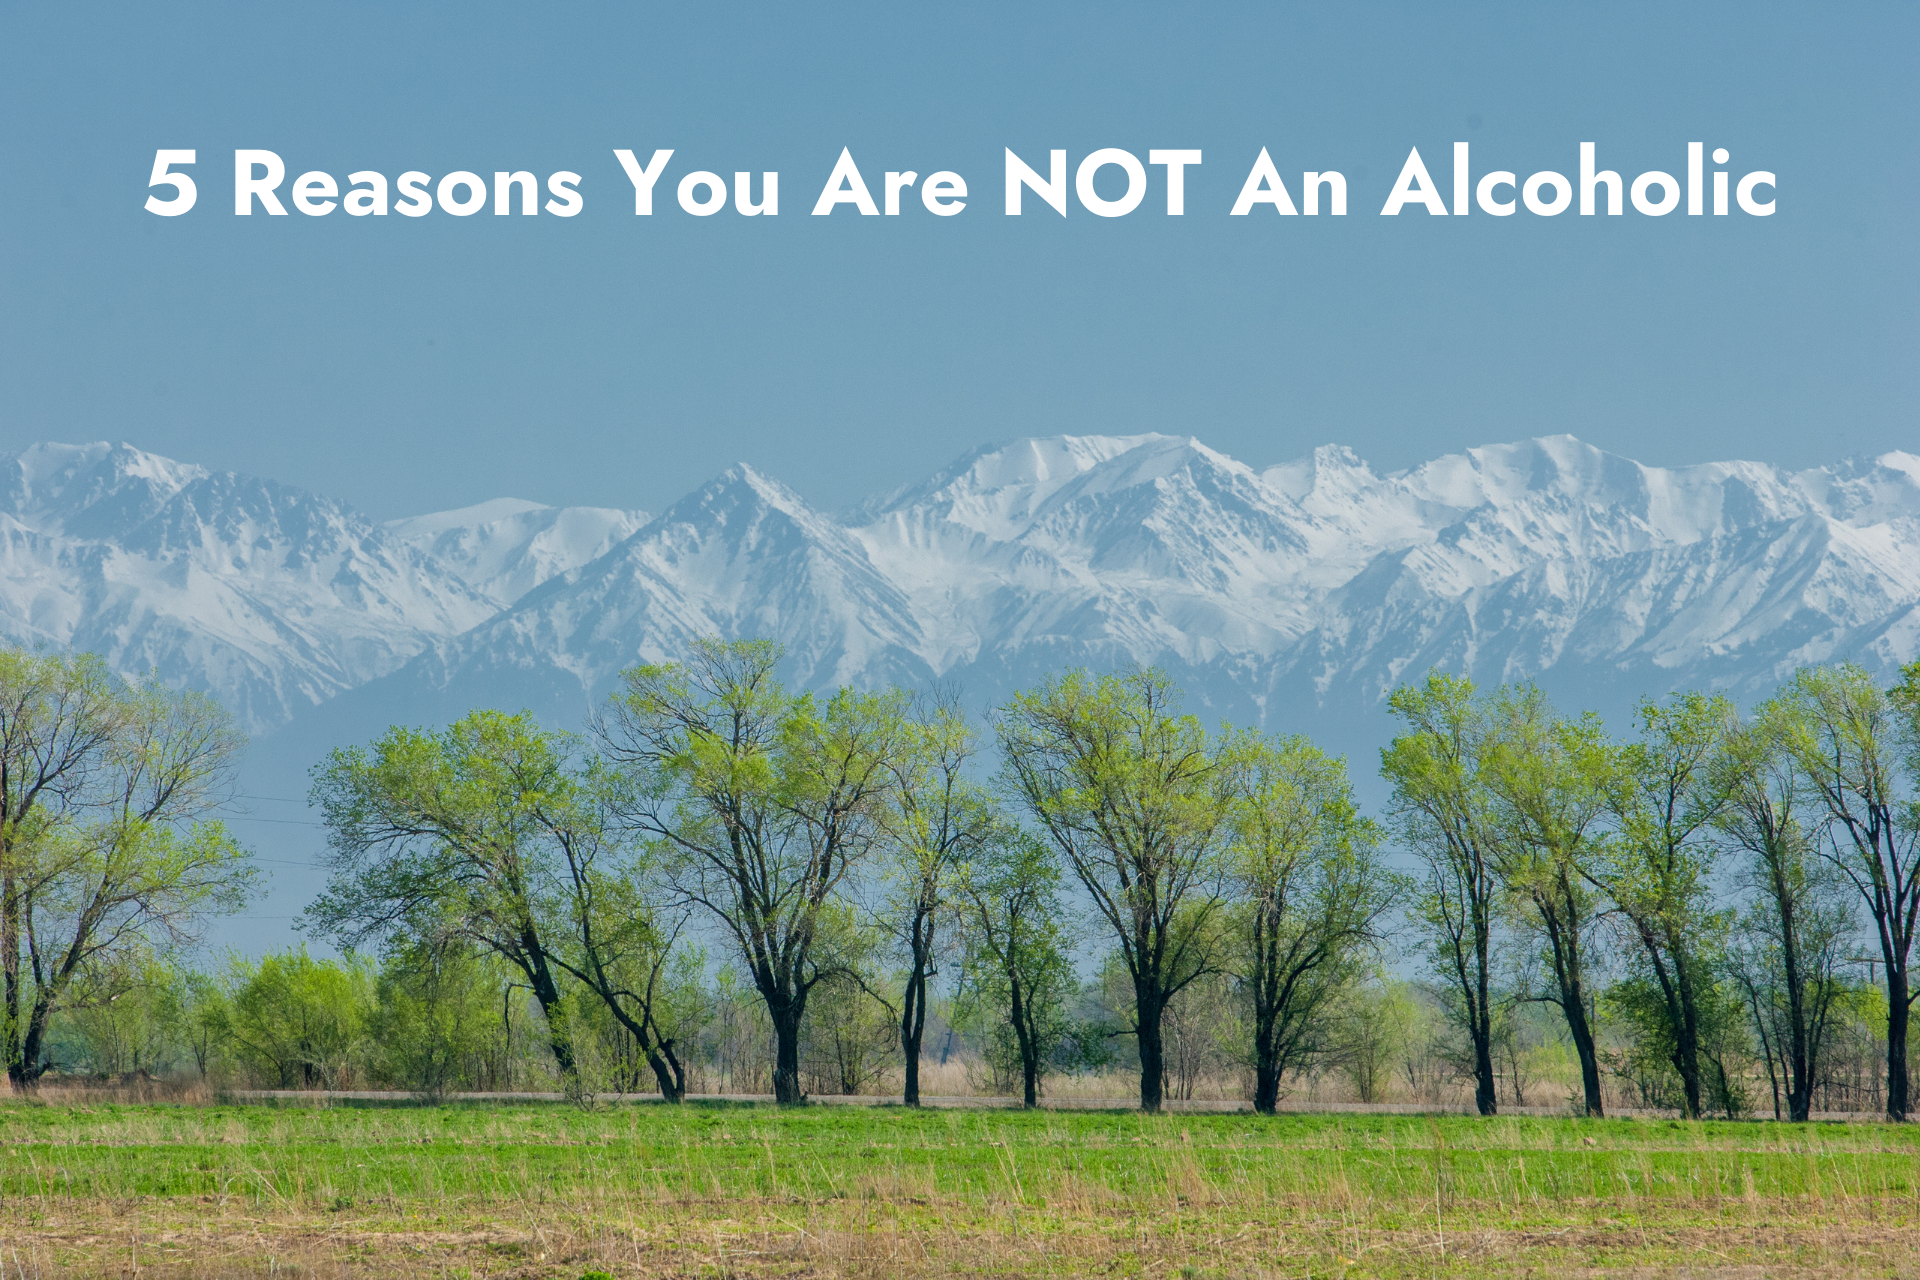 5 Reasons You Are NOT An Alcoholic